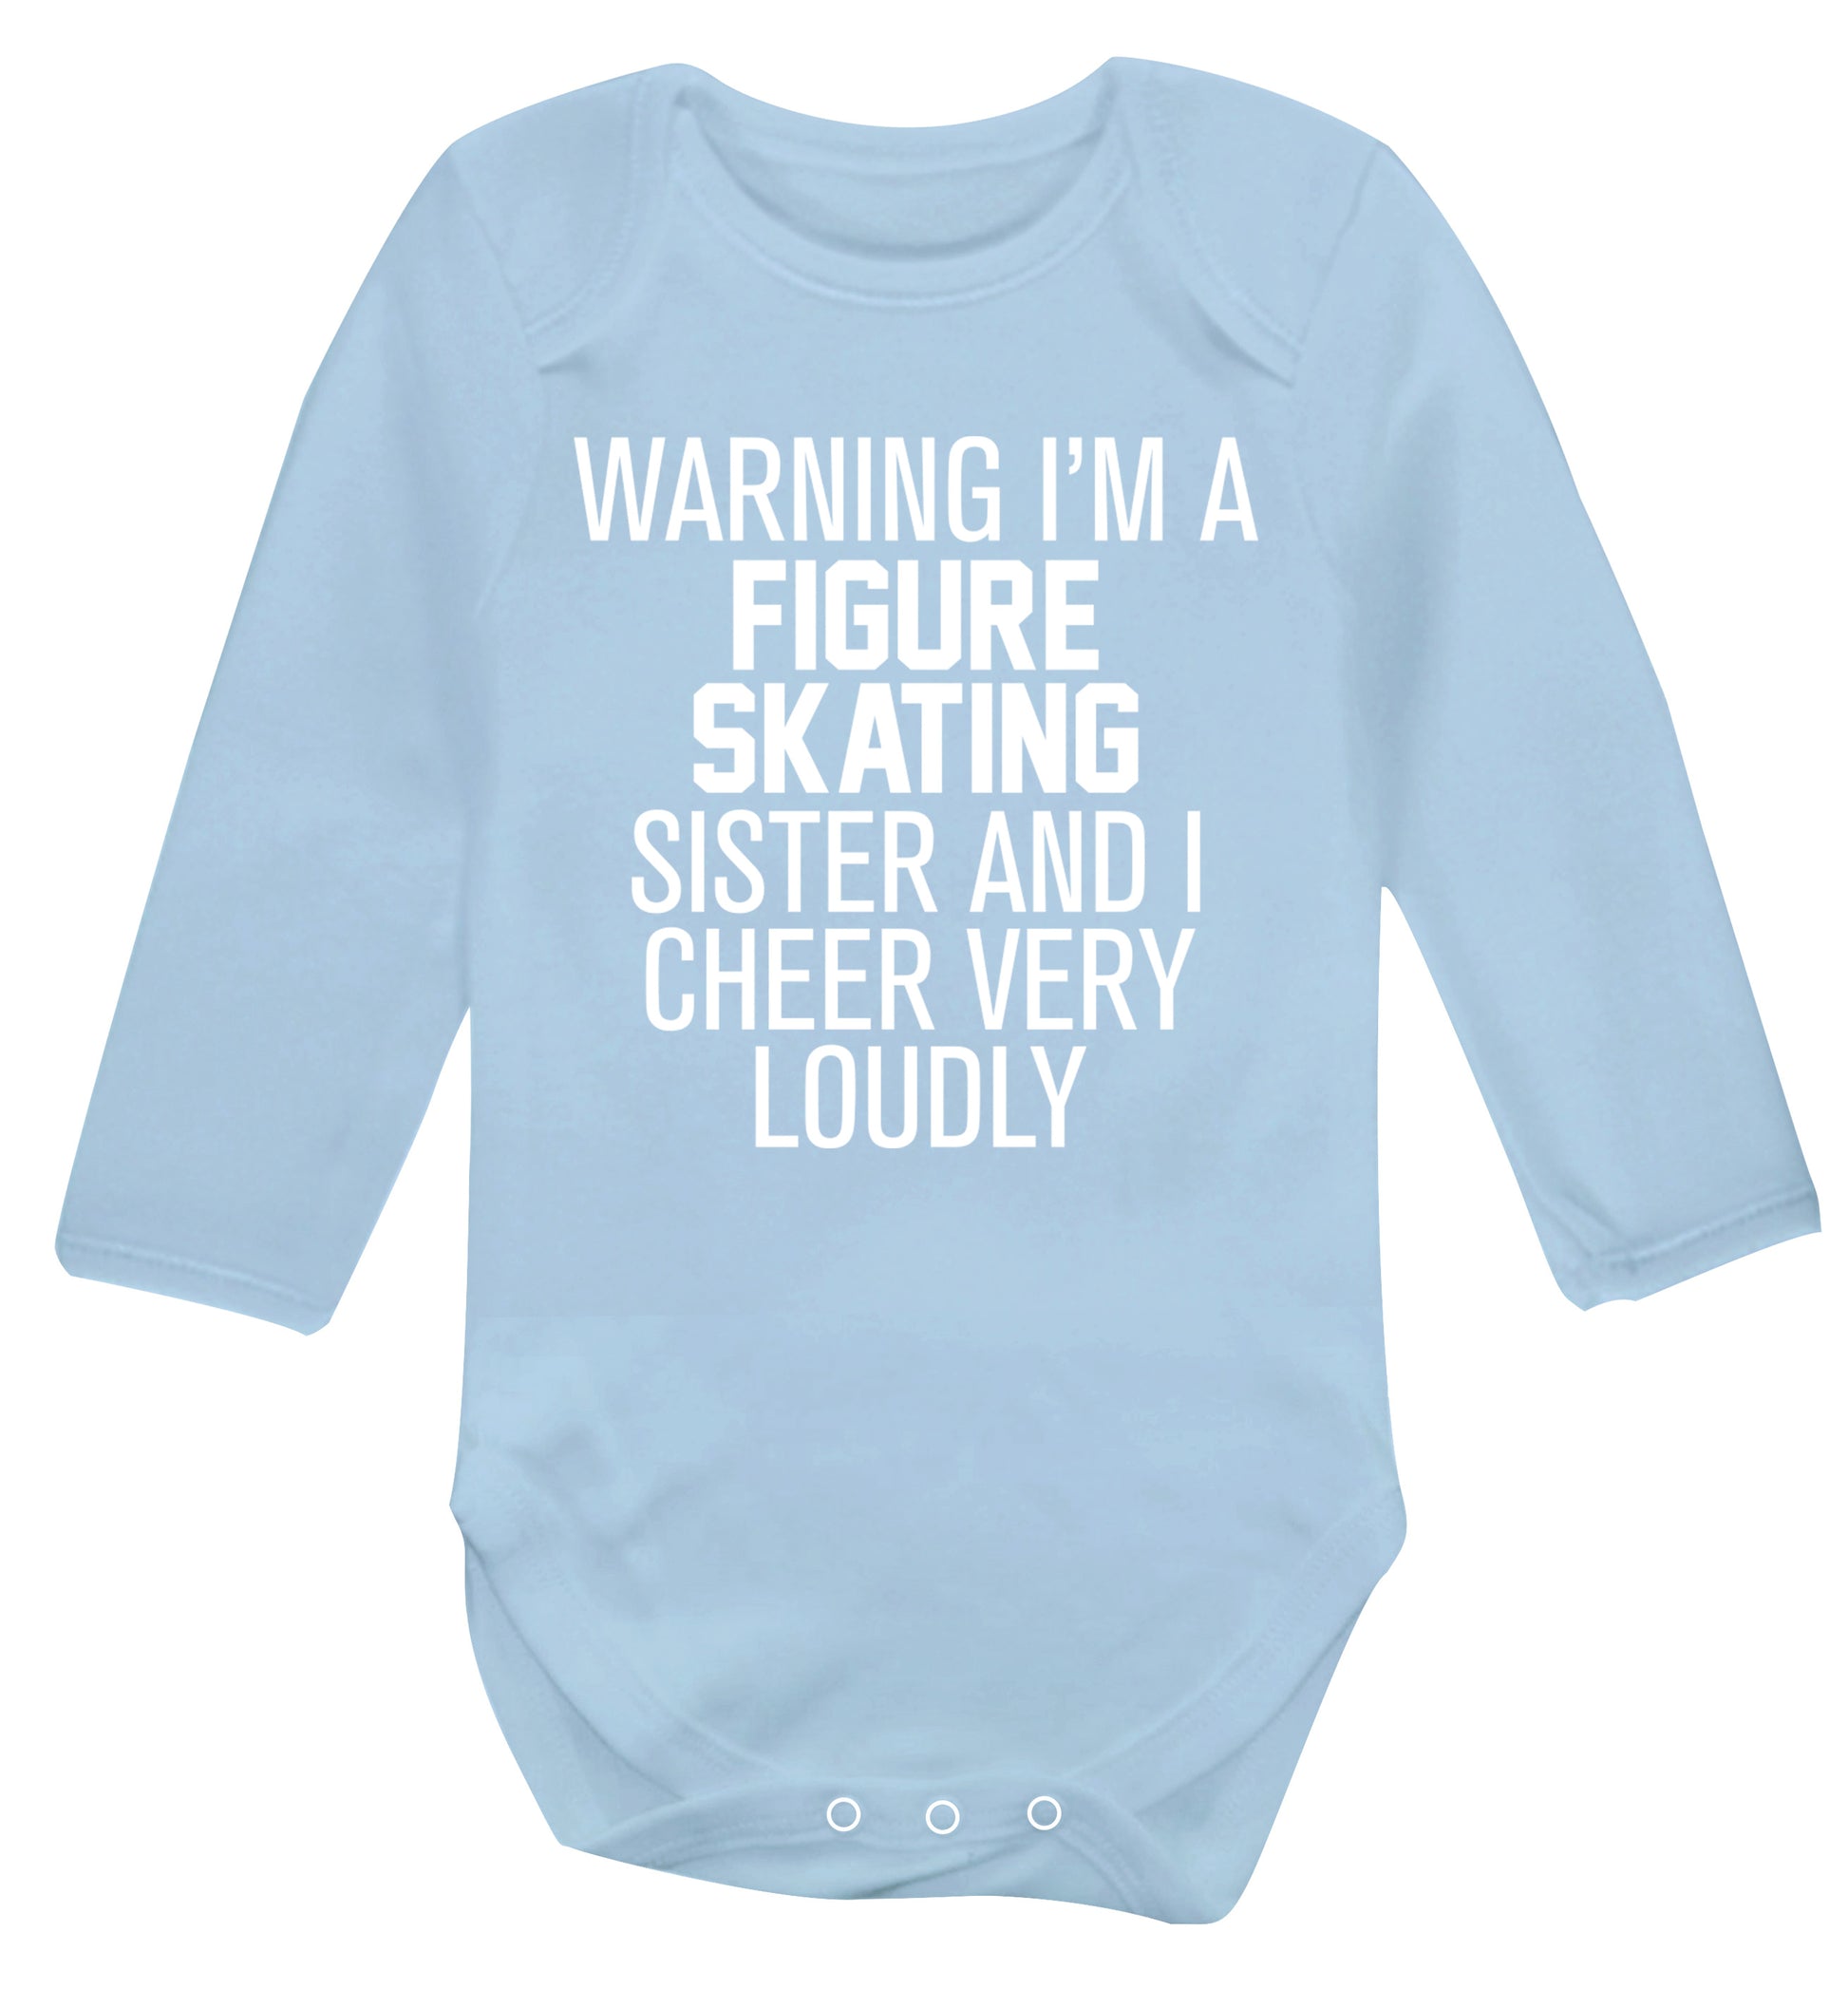 Warning I'm a figure skating sister and I cheer very loudly Baby Vest long sleeved pale blue 6-12 months